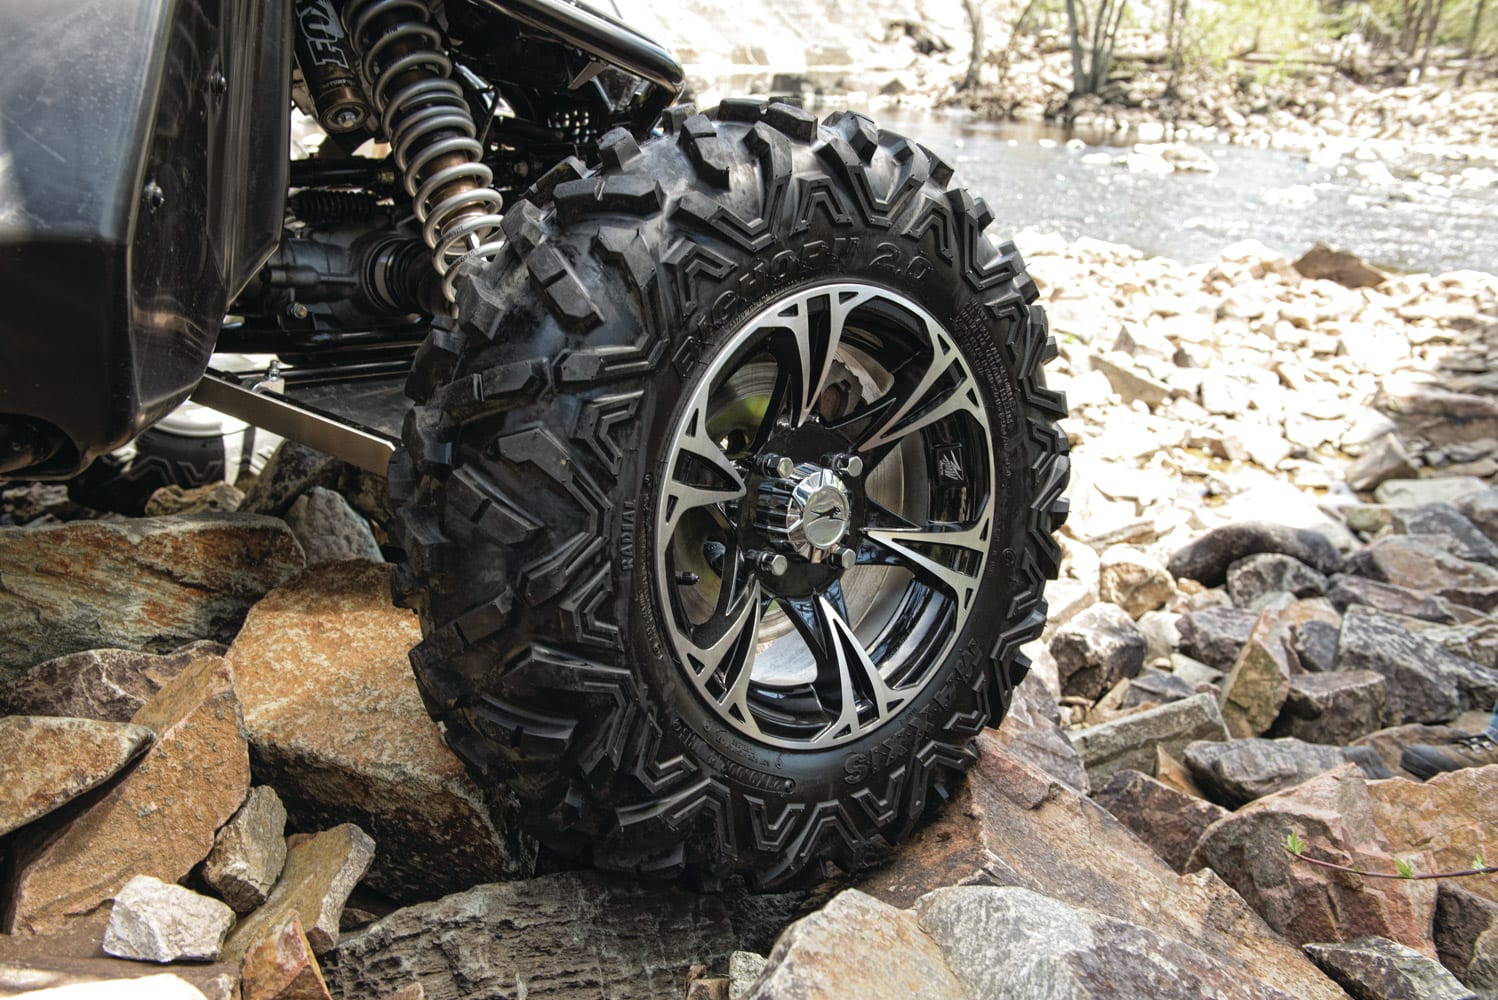 Maintaining your ATV's engine air filtration system